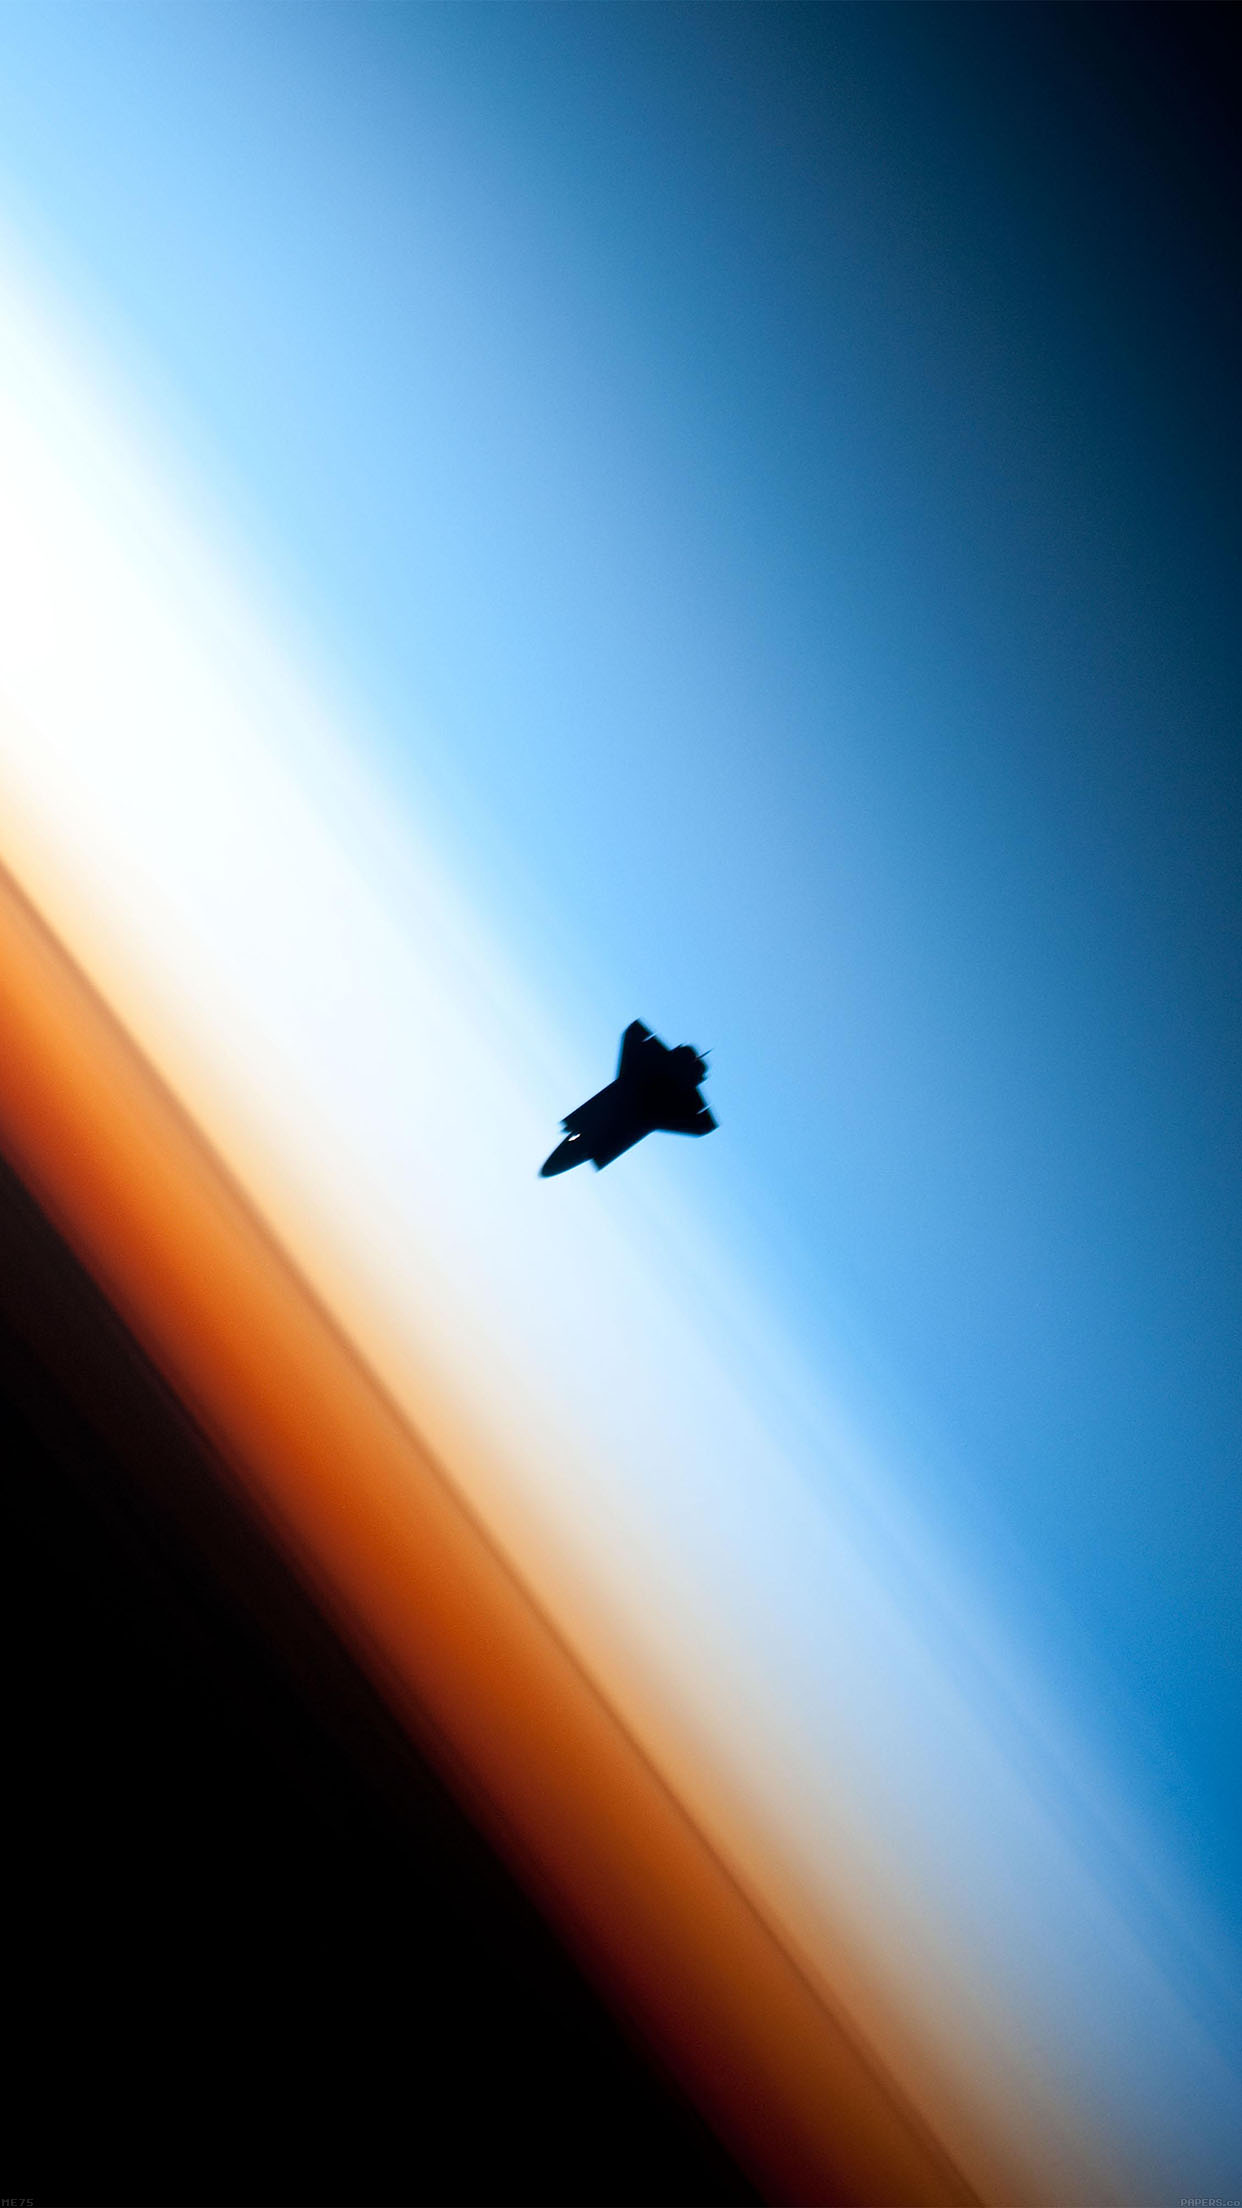 Endeavor Horizon Spaceship From Space Android wallpaper